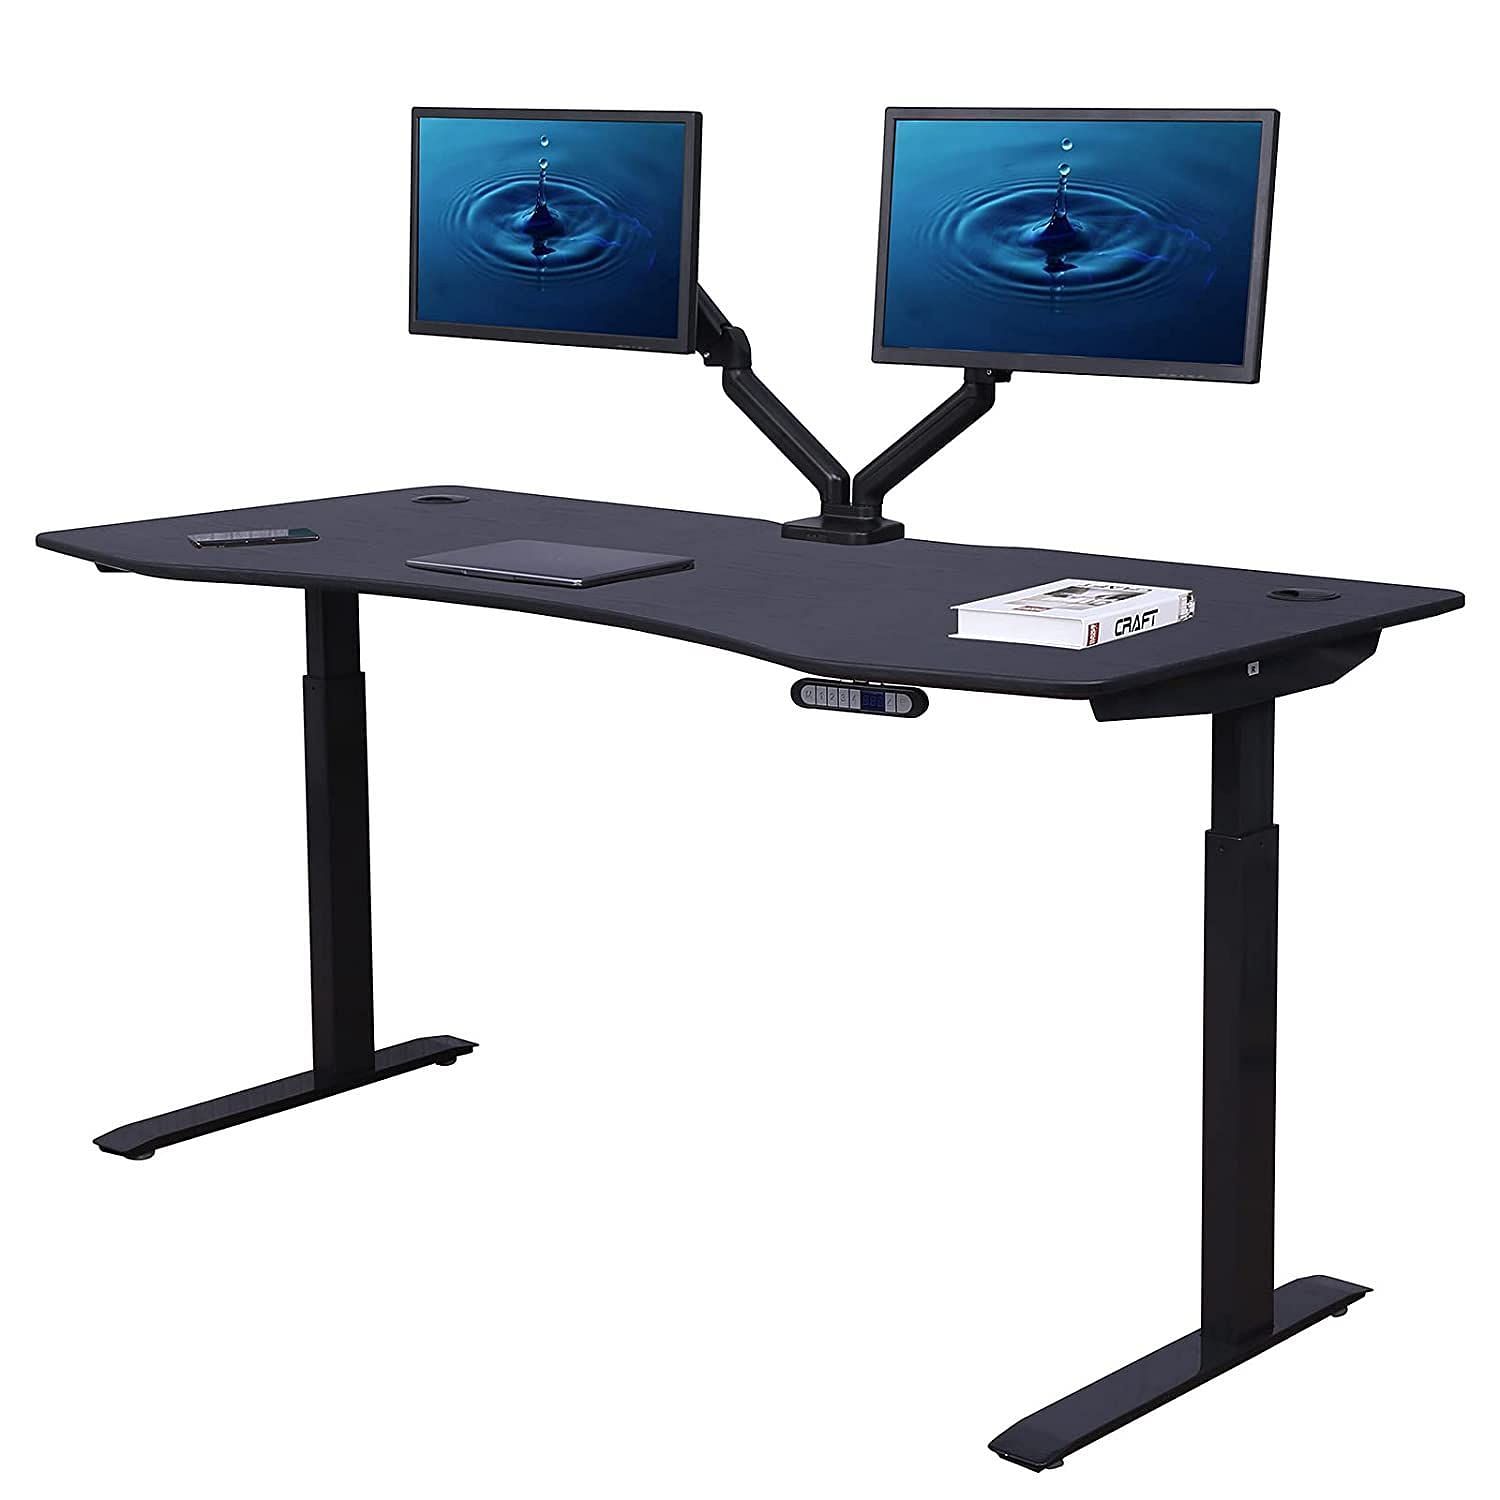 The ApexDesk Elite has two cable holes, but a cable management tray is sold separately (Image via Amazon)